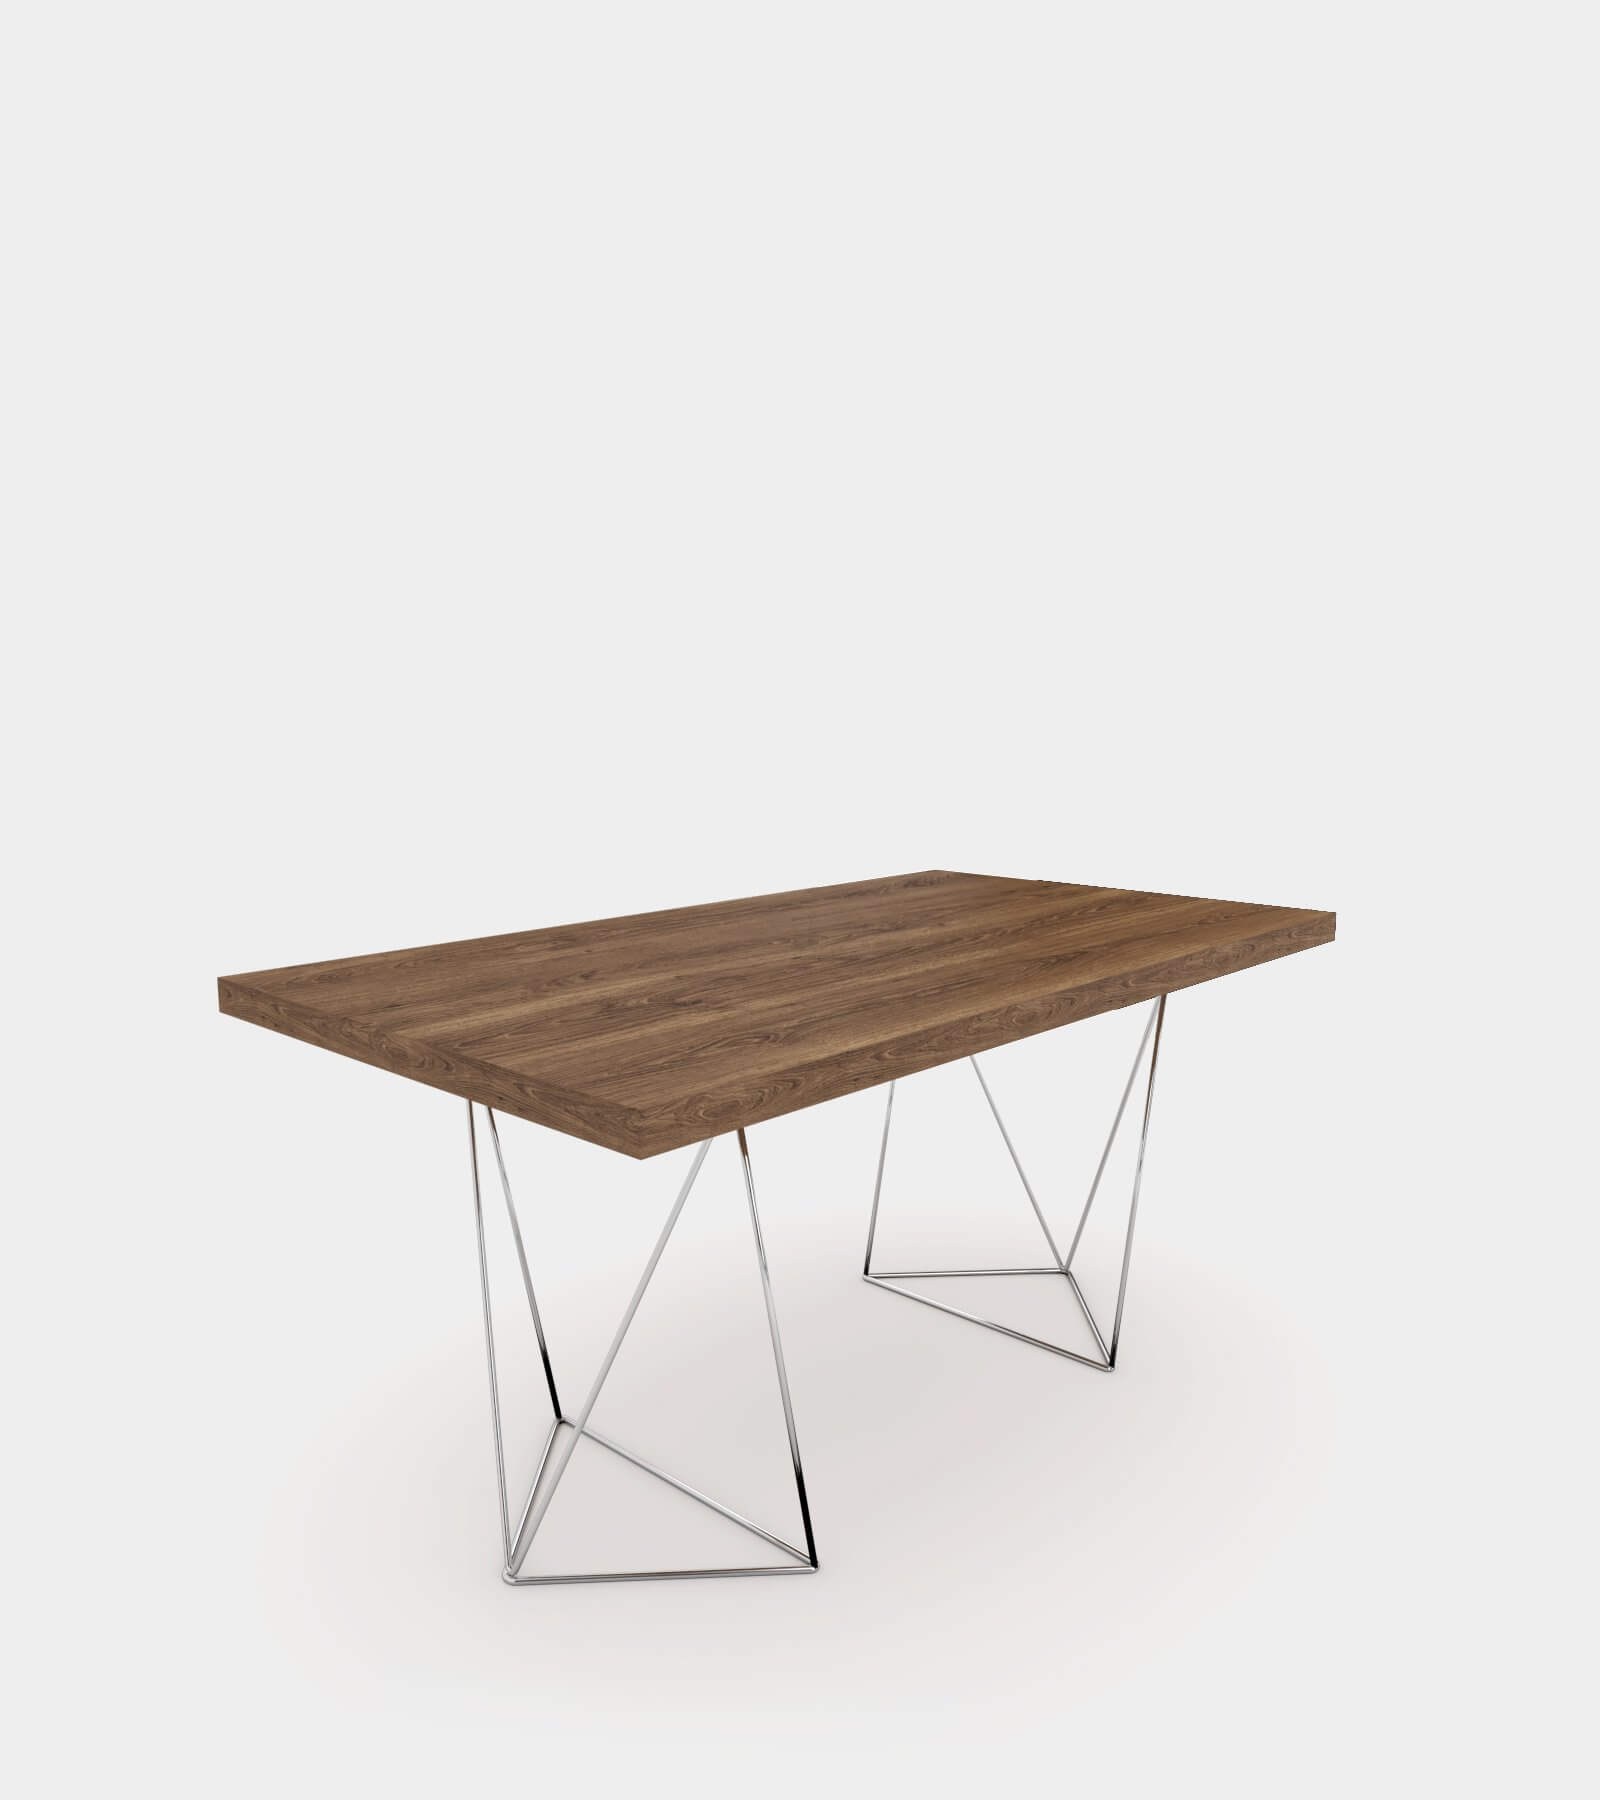 Walnut dining table with chrome legs1- 3D Model